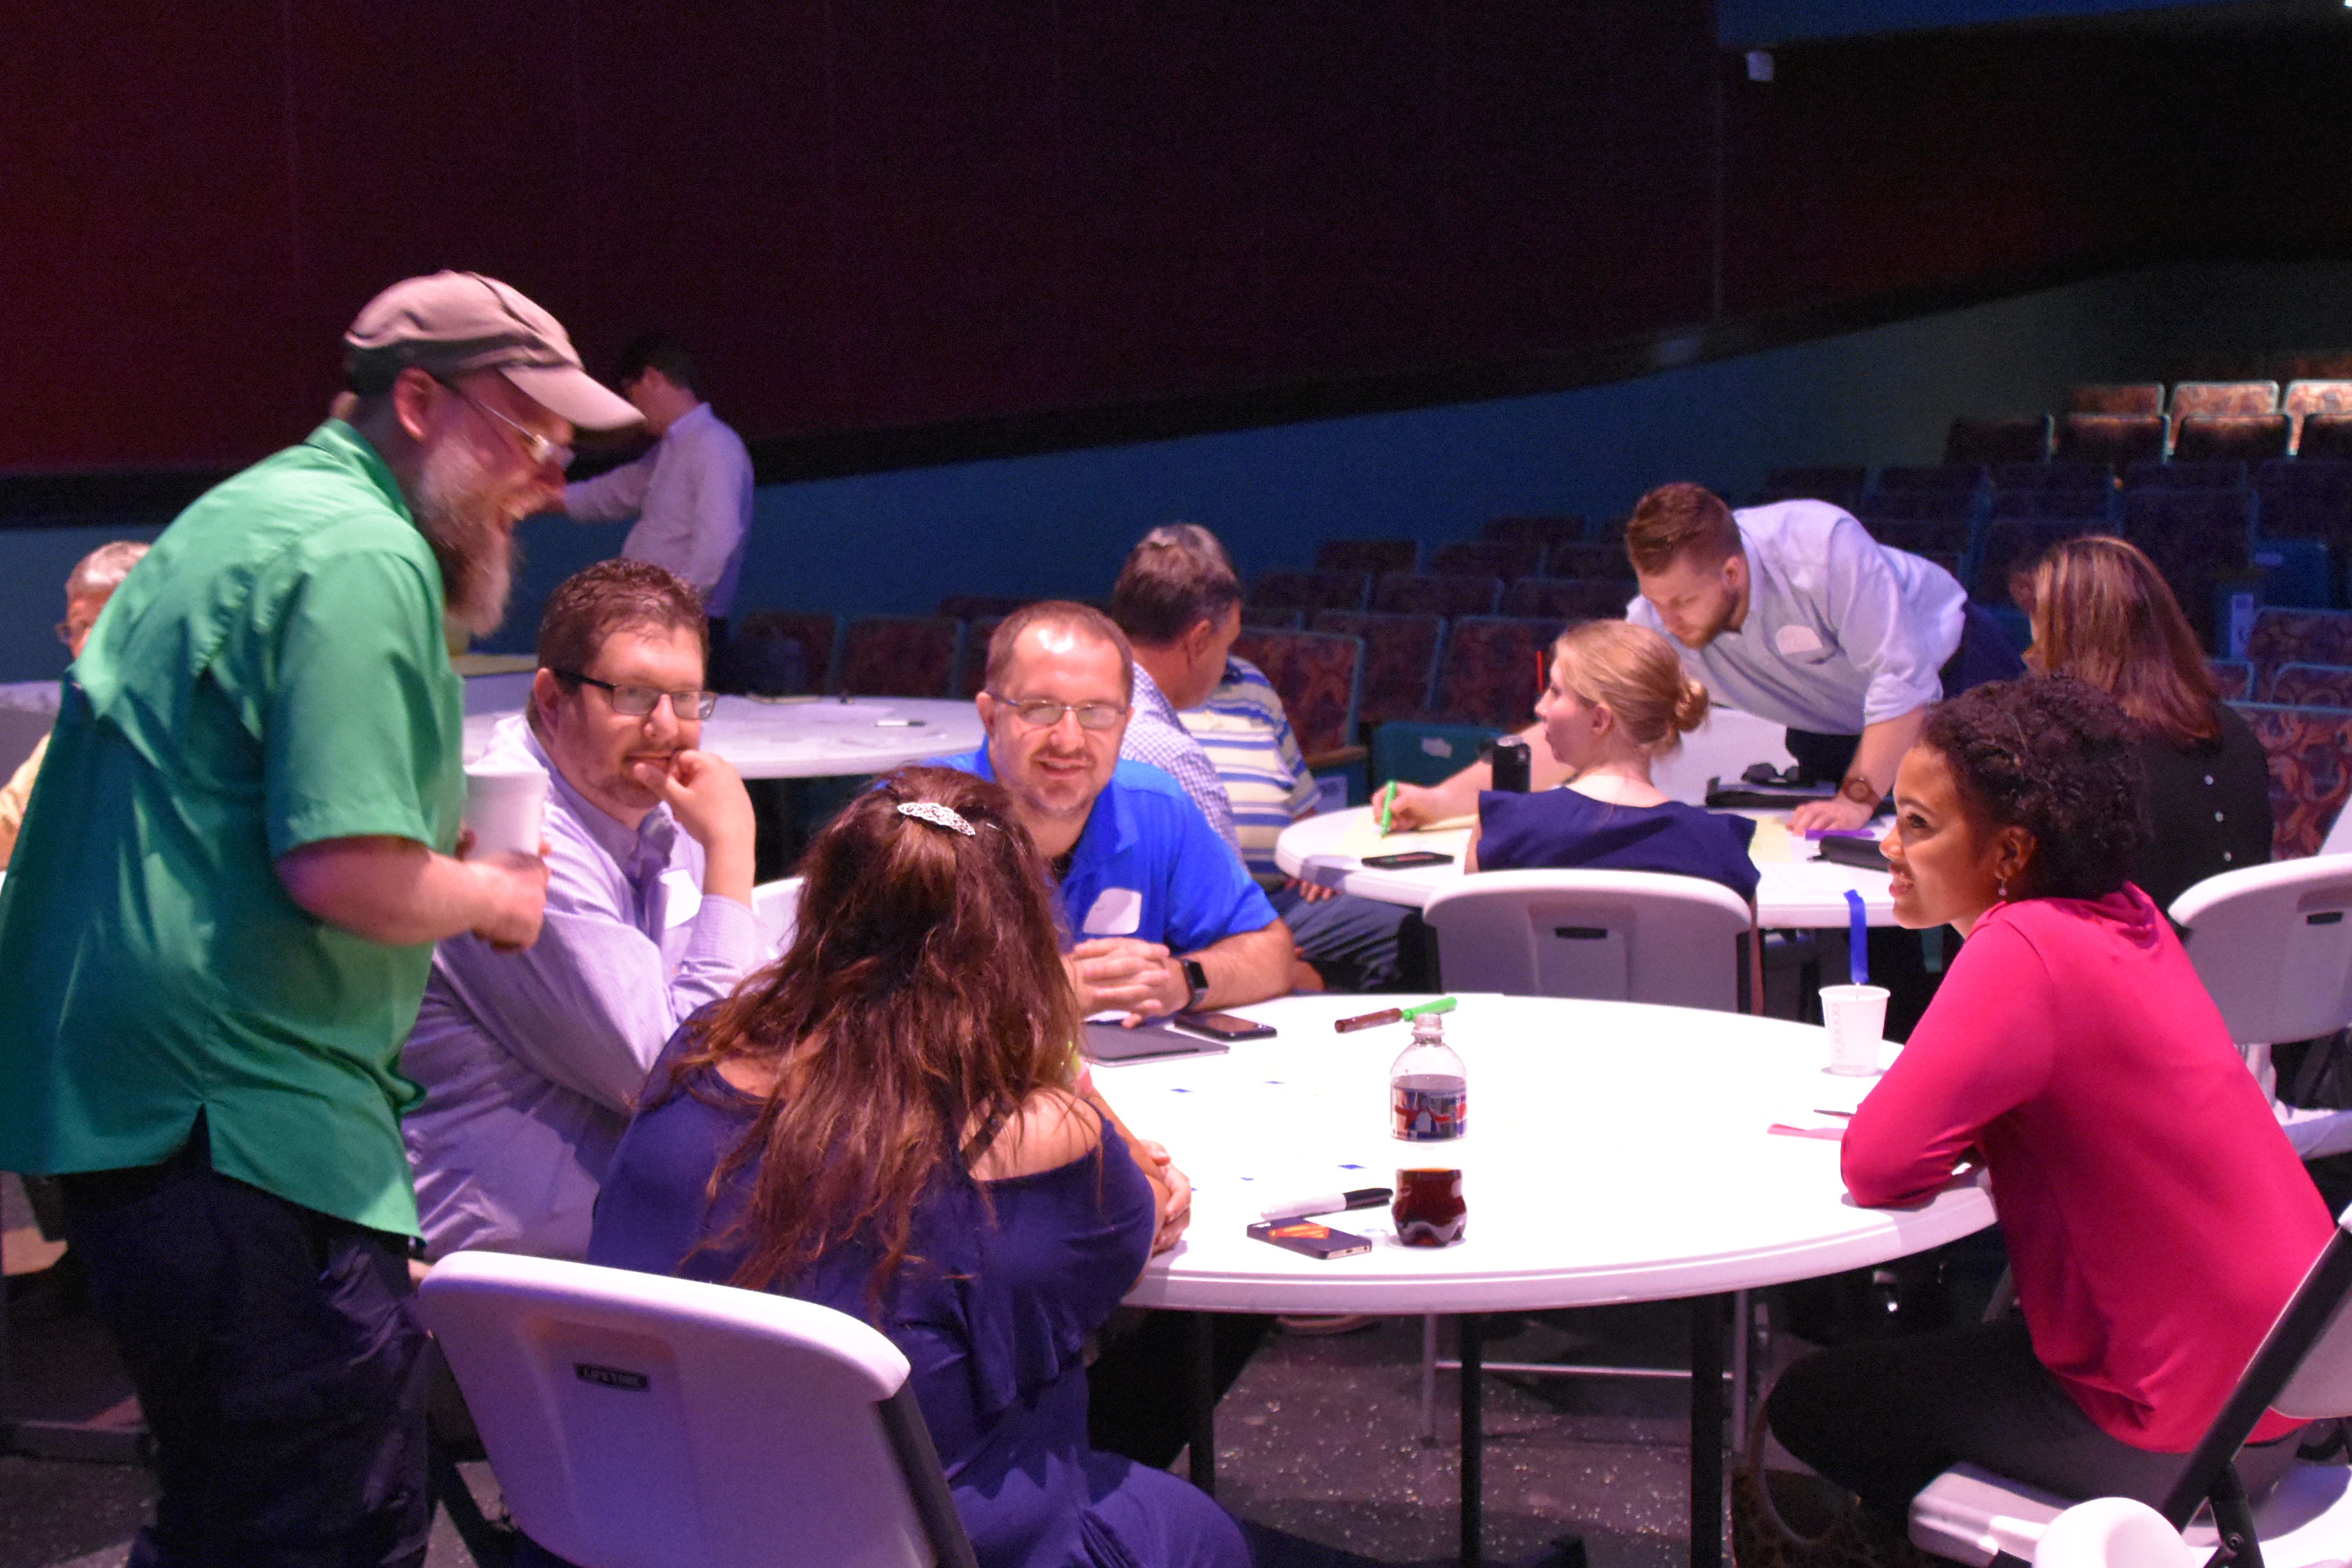 downtown teams 1 photo of team meeting in Pineville. Men and women seated at tables with facilitator